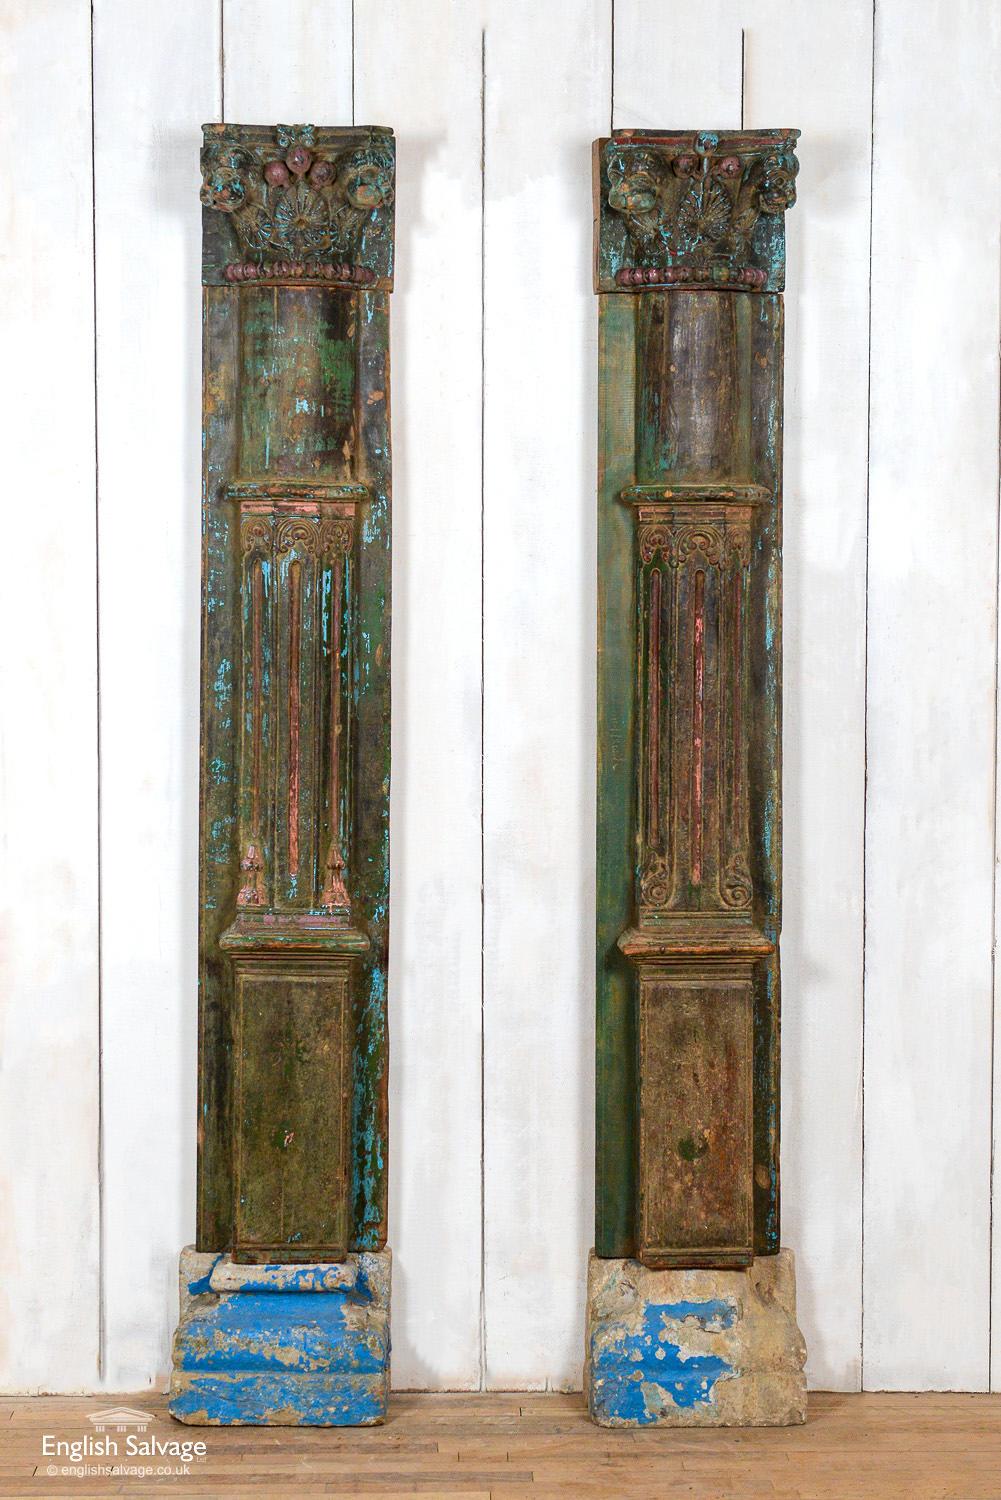 Reclaimed Indian pillars in three parts with stone bases, teak columns and carved teak capitals. The stone bases have remnants of blue paint and the stone has softened with age. The columns are carved in three sections: the bottoms with a square